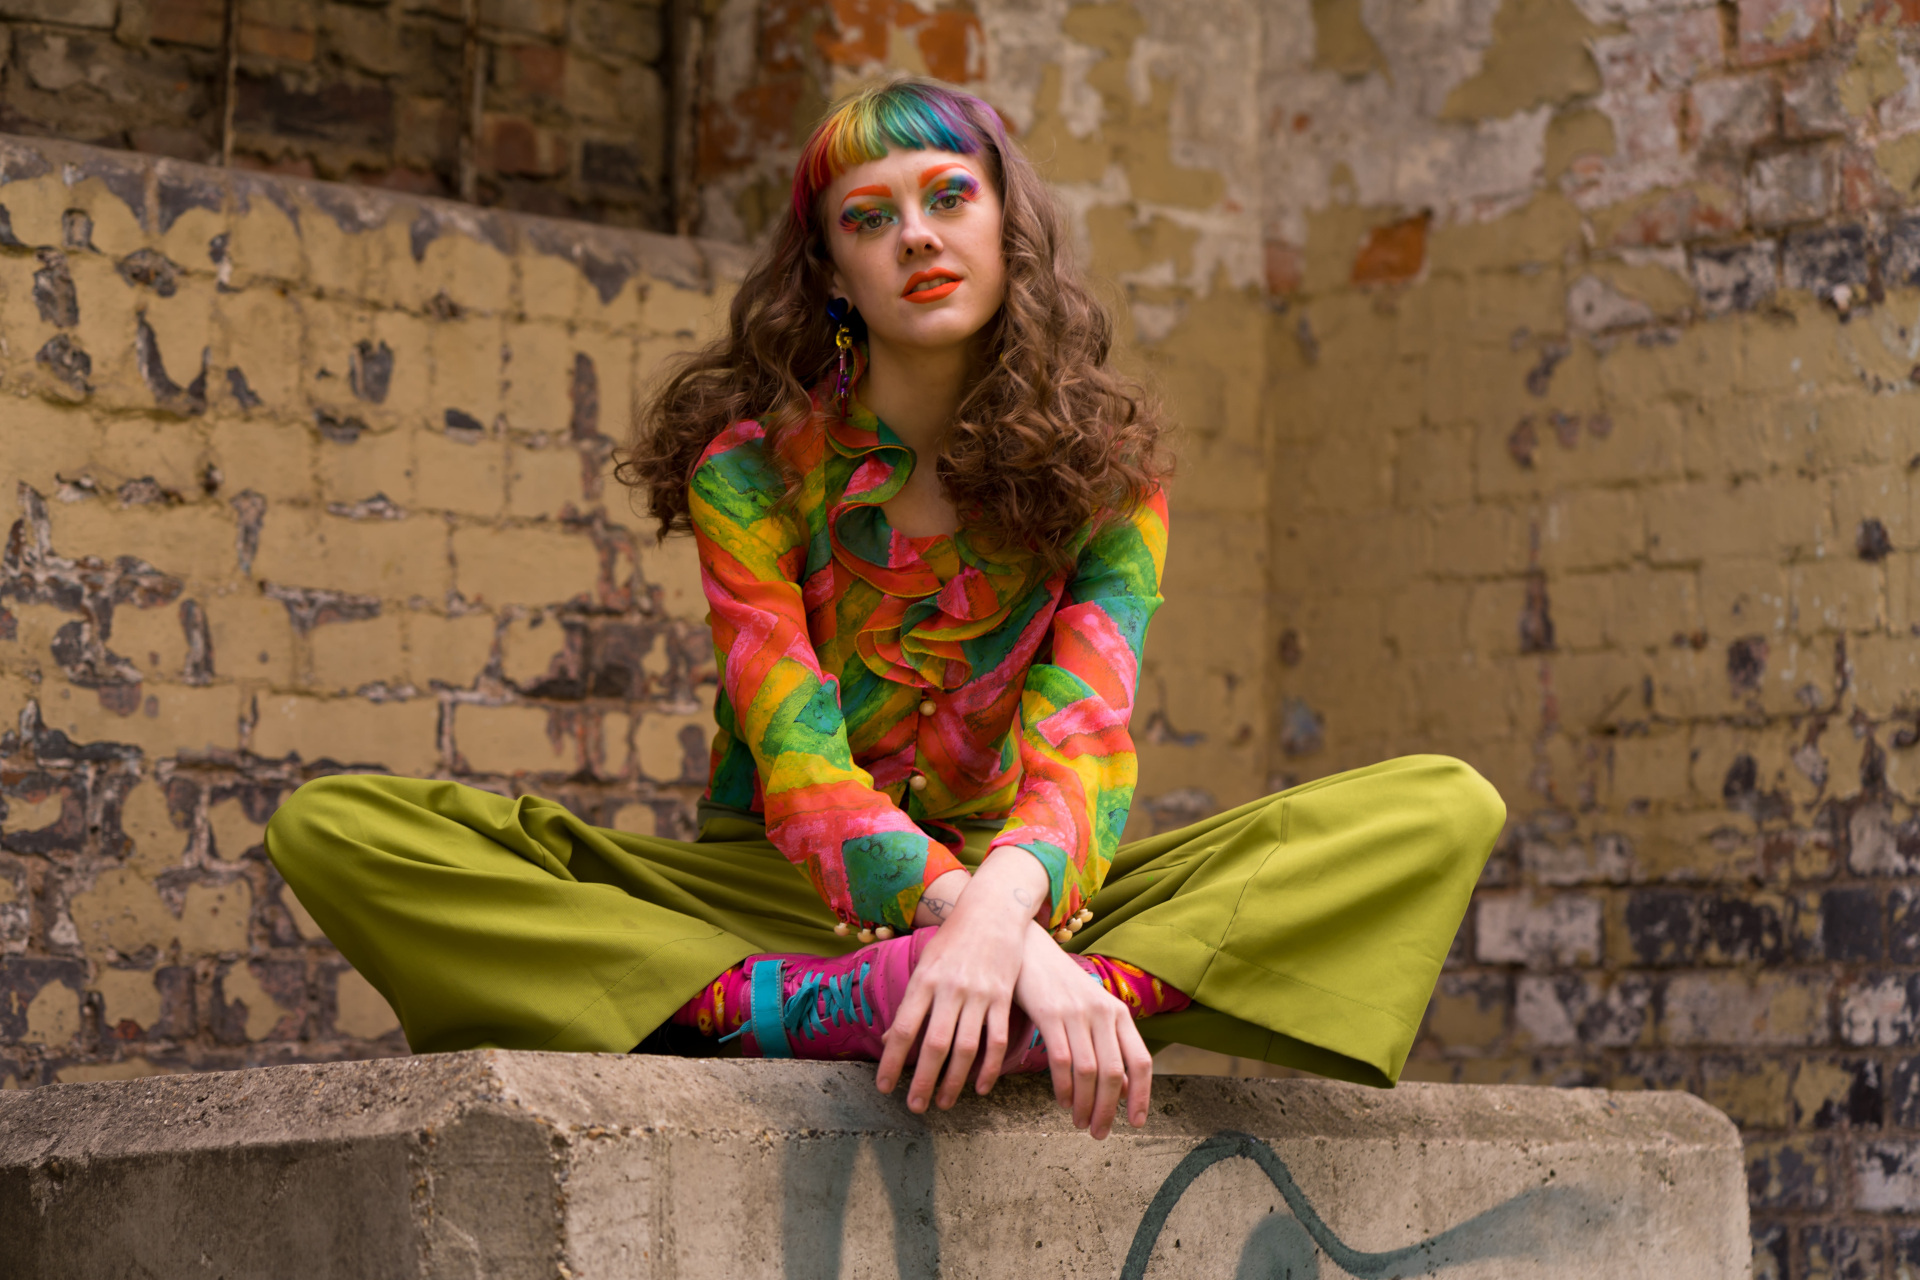 Woman wearing rainbow top and makeup